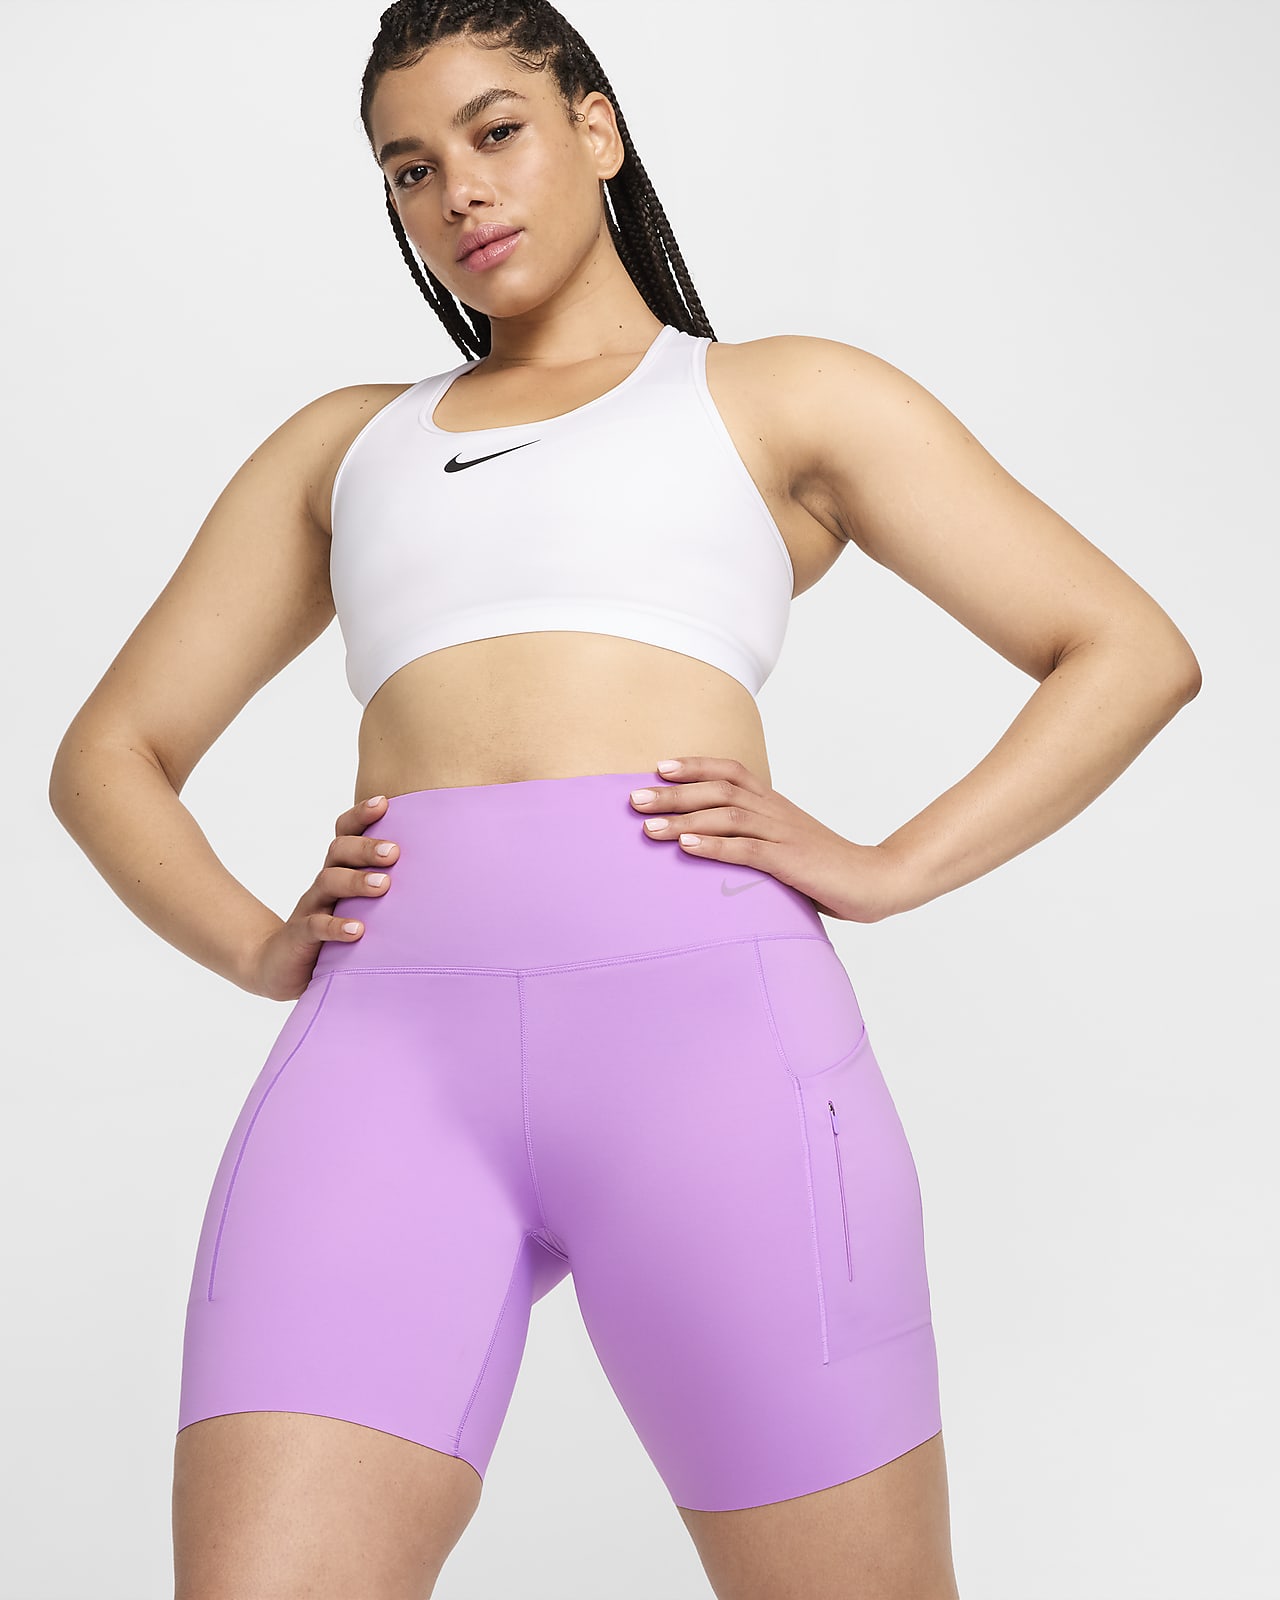 Nike Go Women's Firm-Support High-Waisted 8" Biker Shorts with Pockets